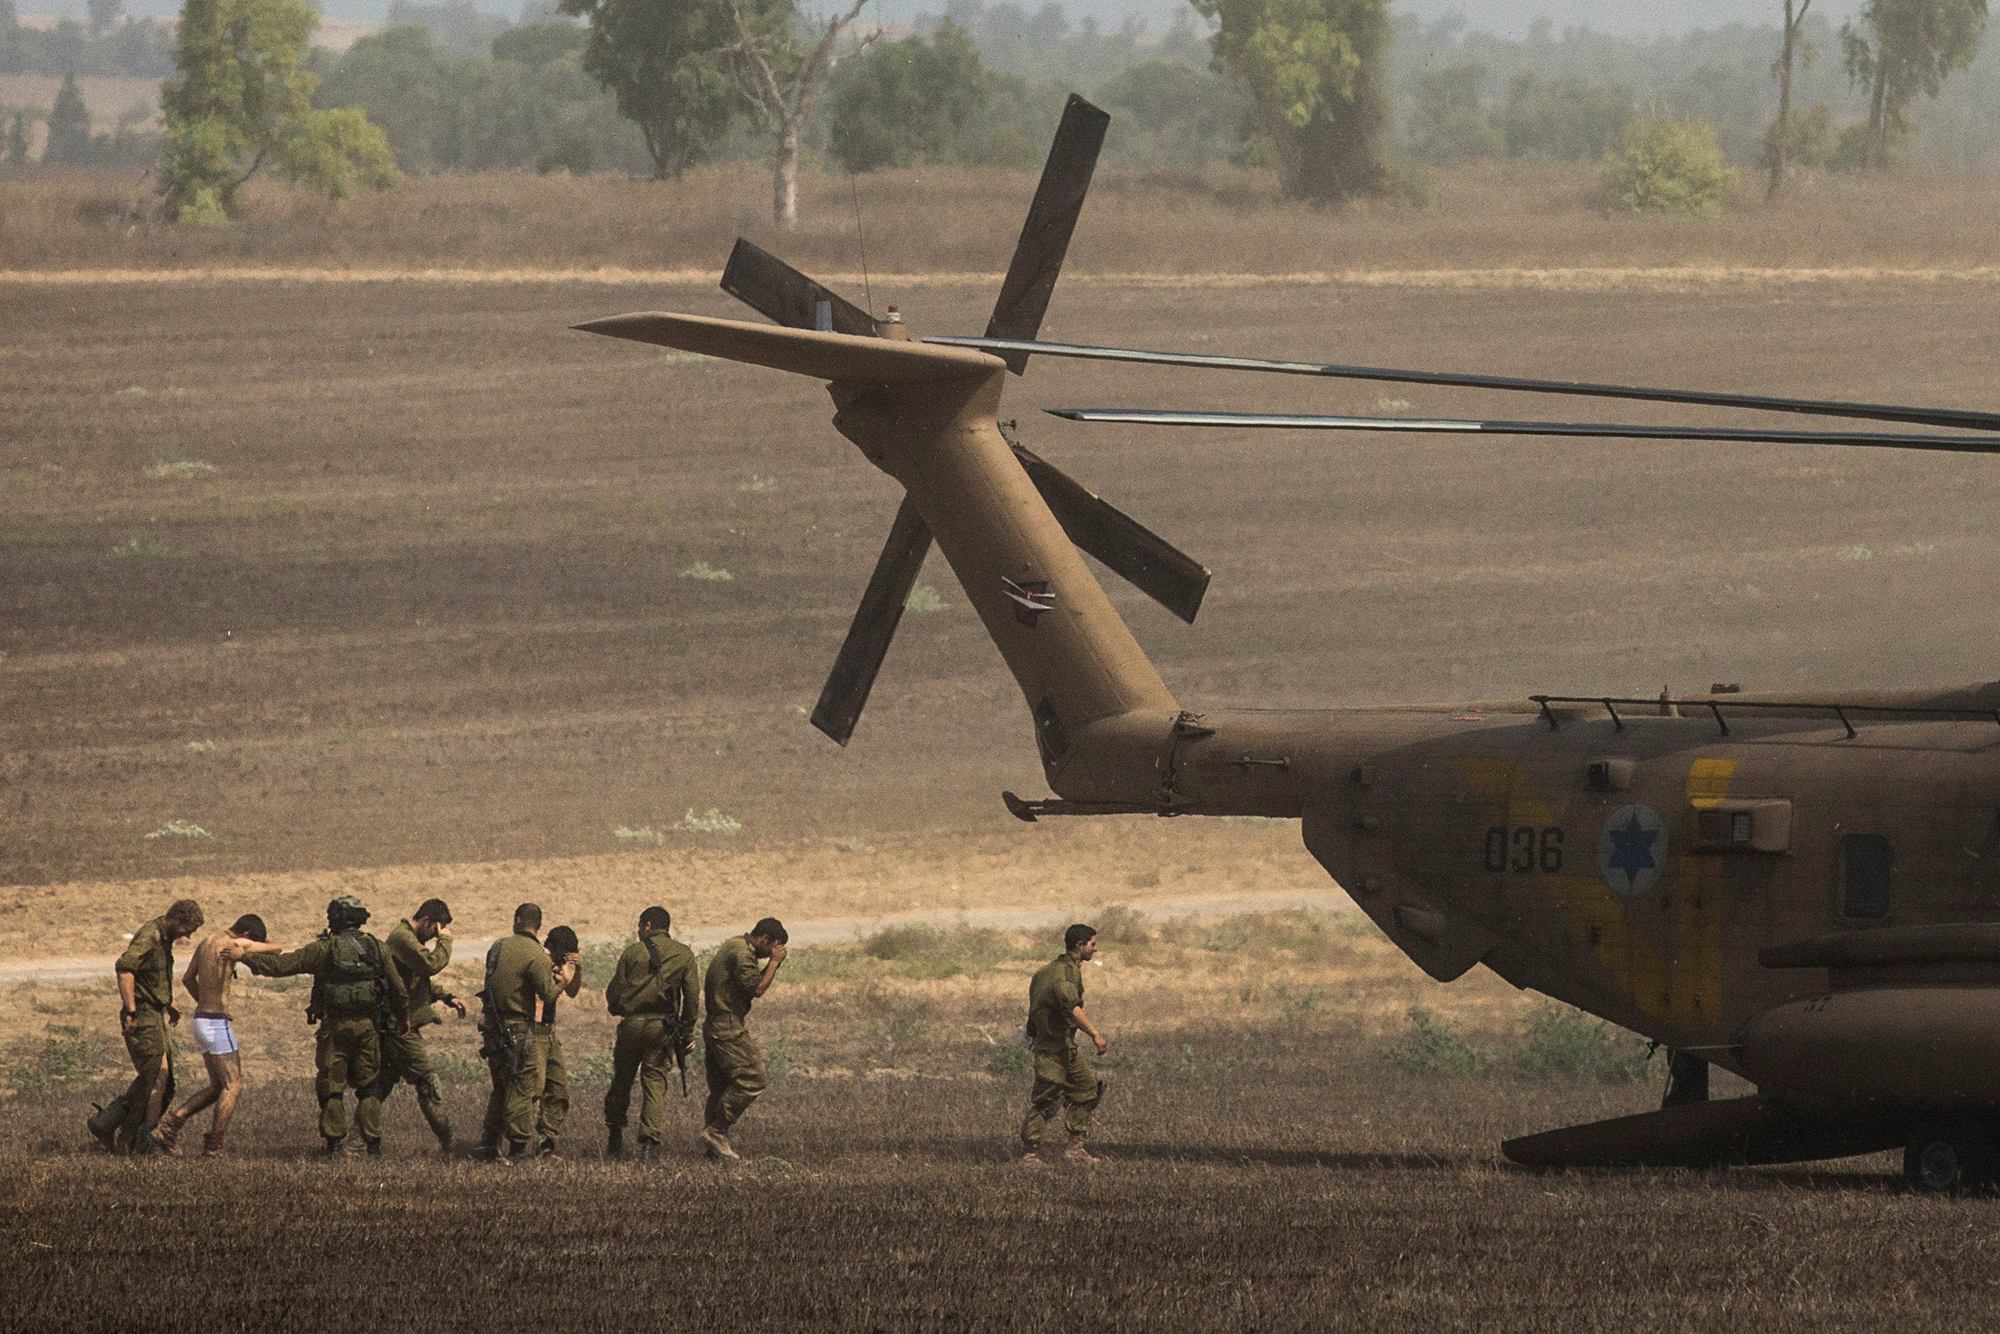 Wounded Israeli soldiers are brought to a helicopter on July 23, 2014 near Kafar Aza, Israel.